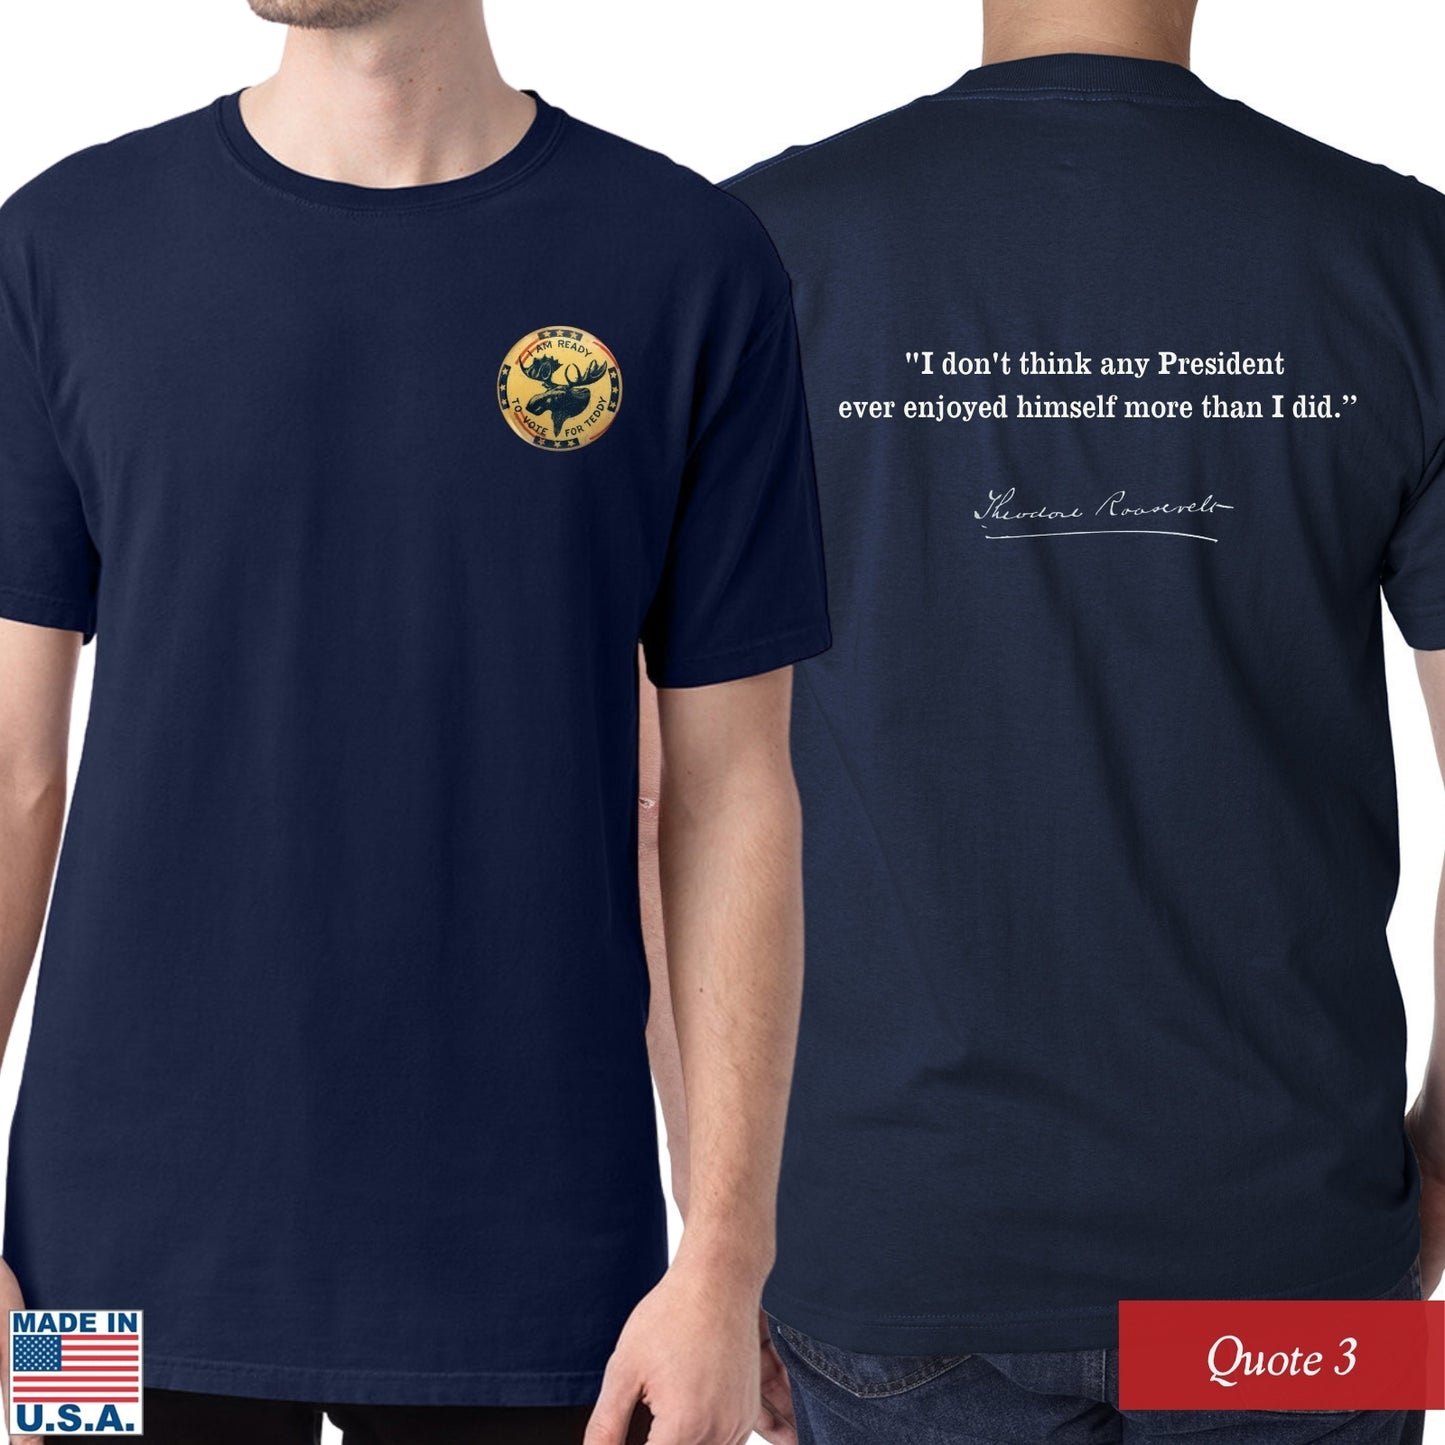 Quote 3 of the Teddy Roosevelt “I’m ready to vote for Teddy” presidential campaign shirt — Made in America from The History List store